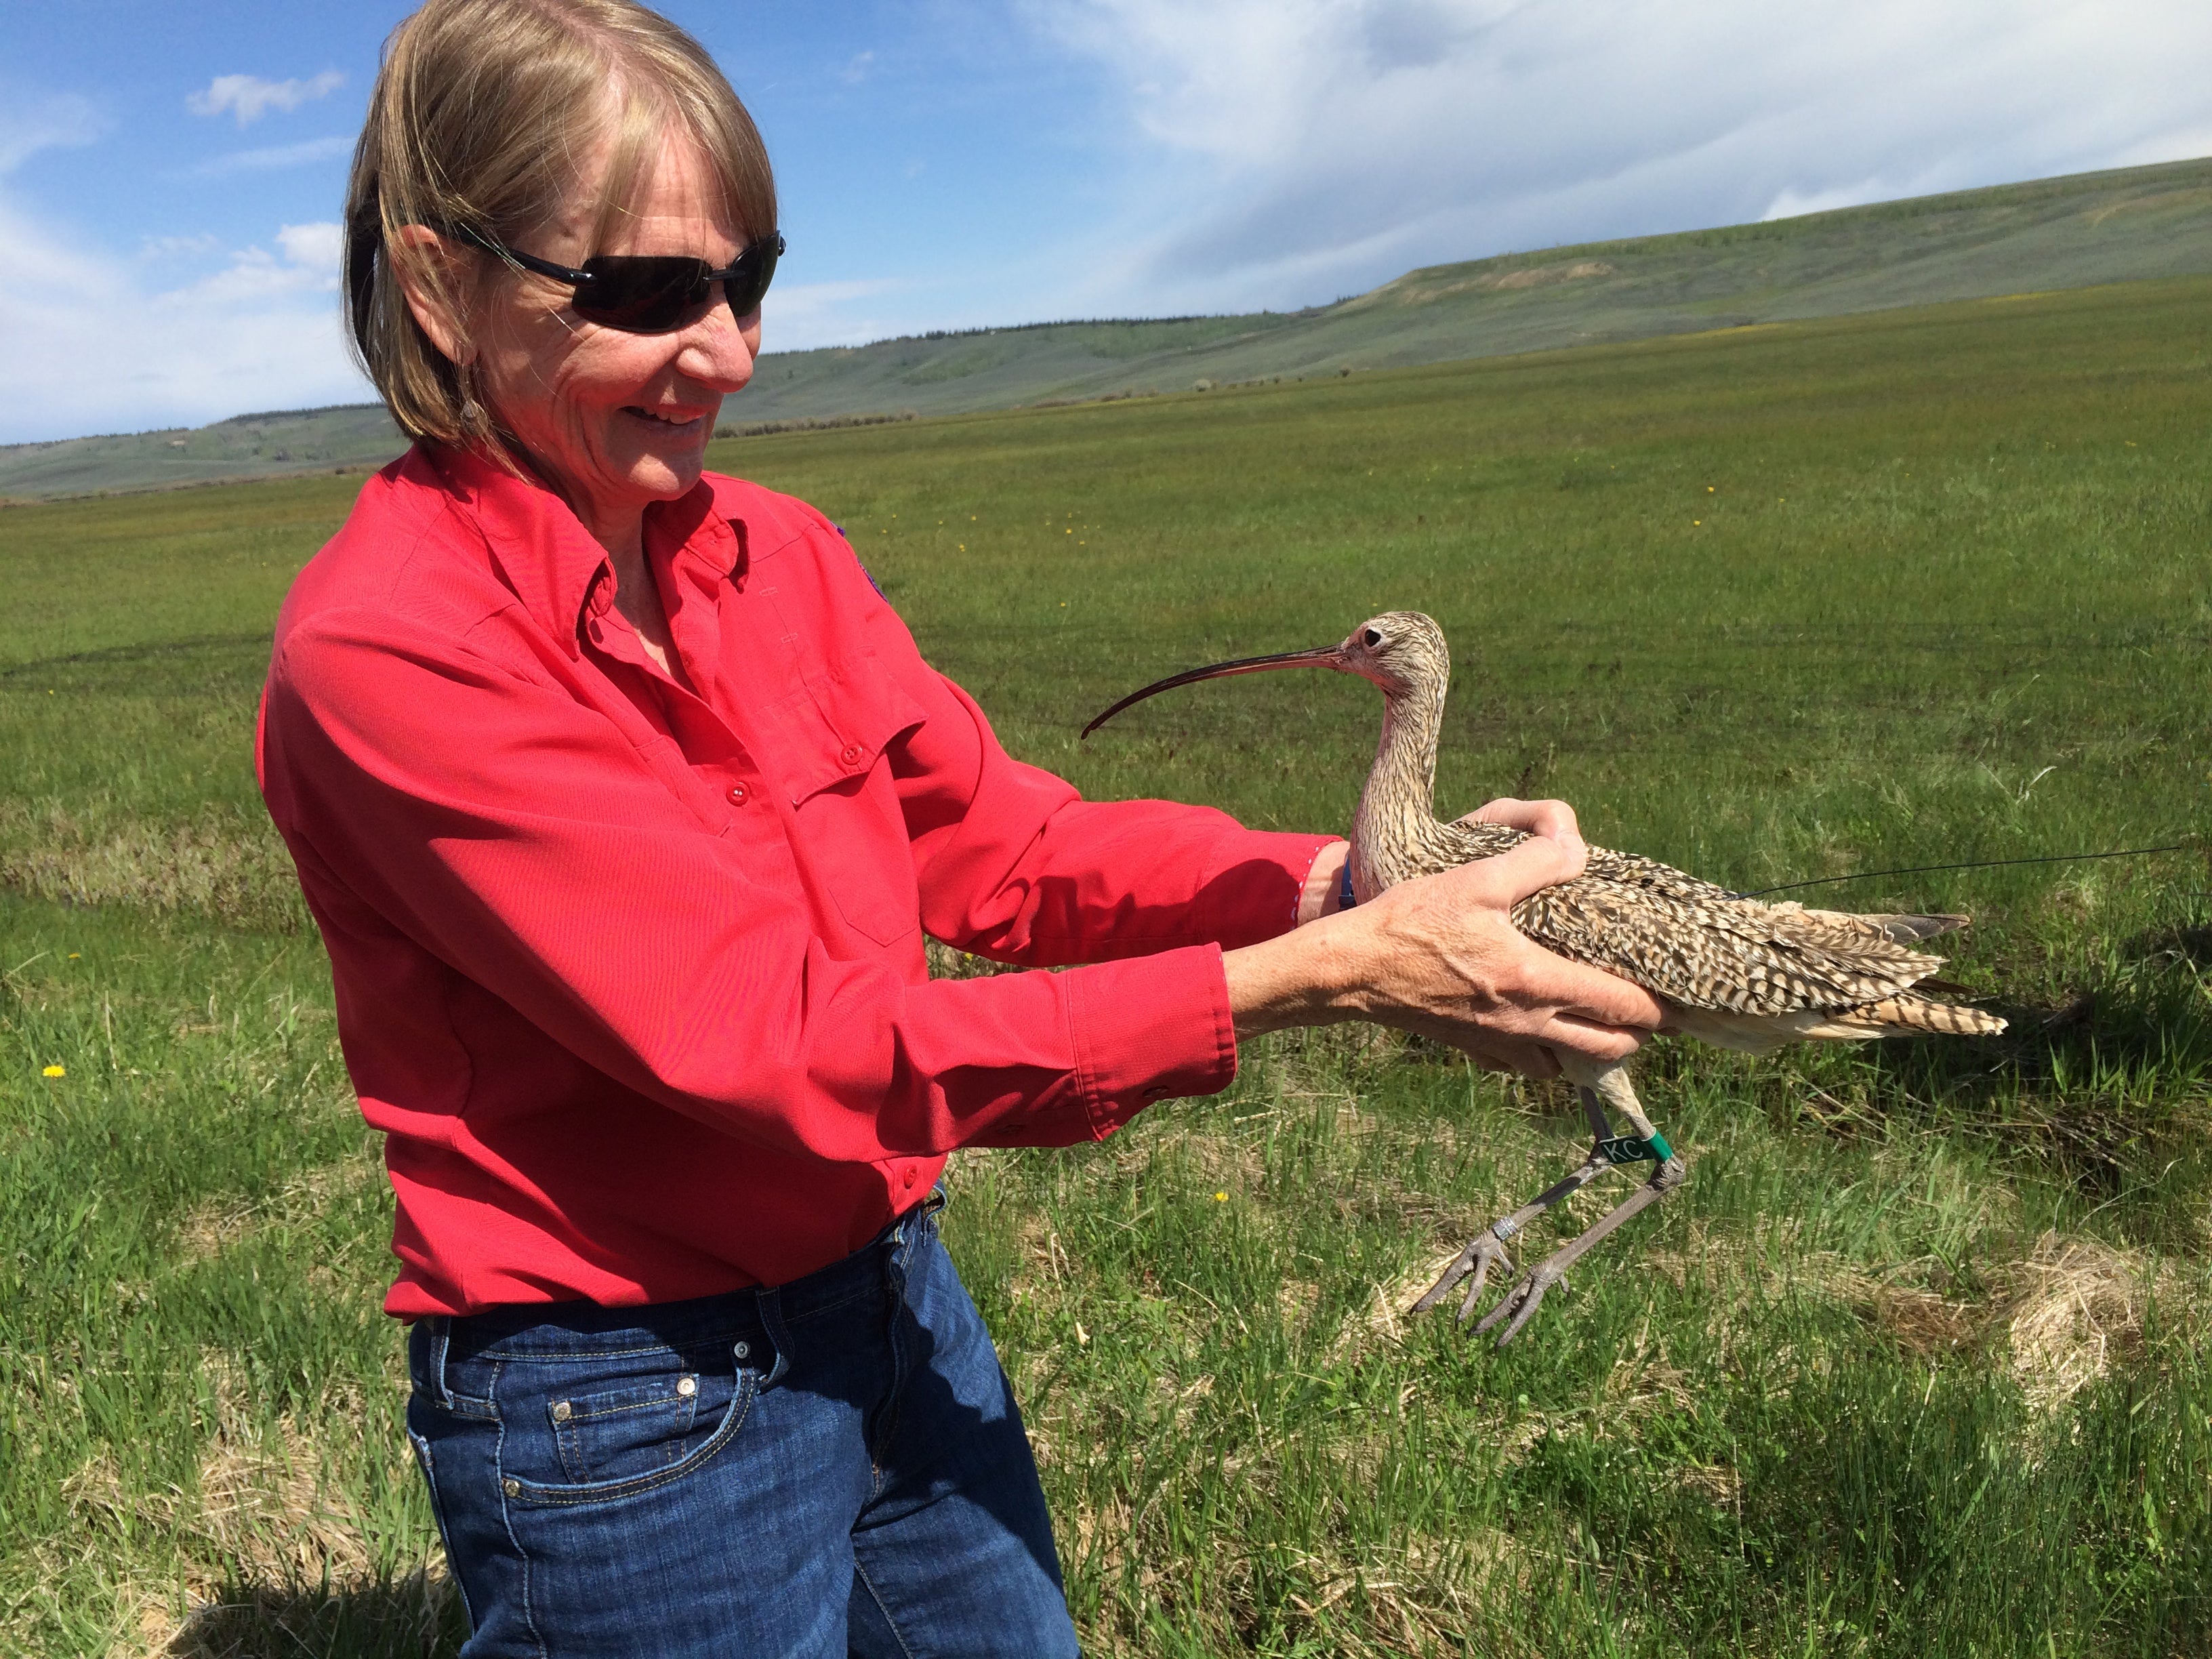 A woman stands in a grassy field, holding a curlew in her hands. She and the curlew look at each other eye to eye.